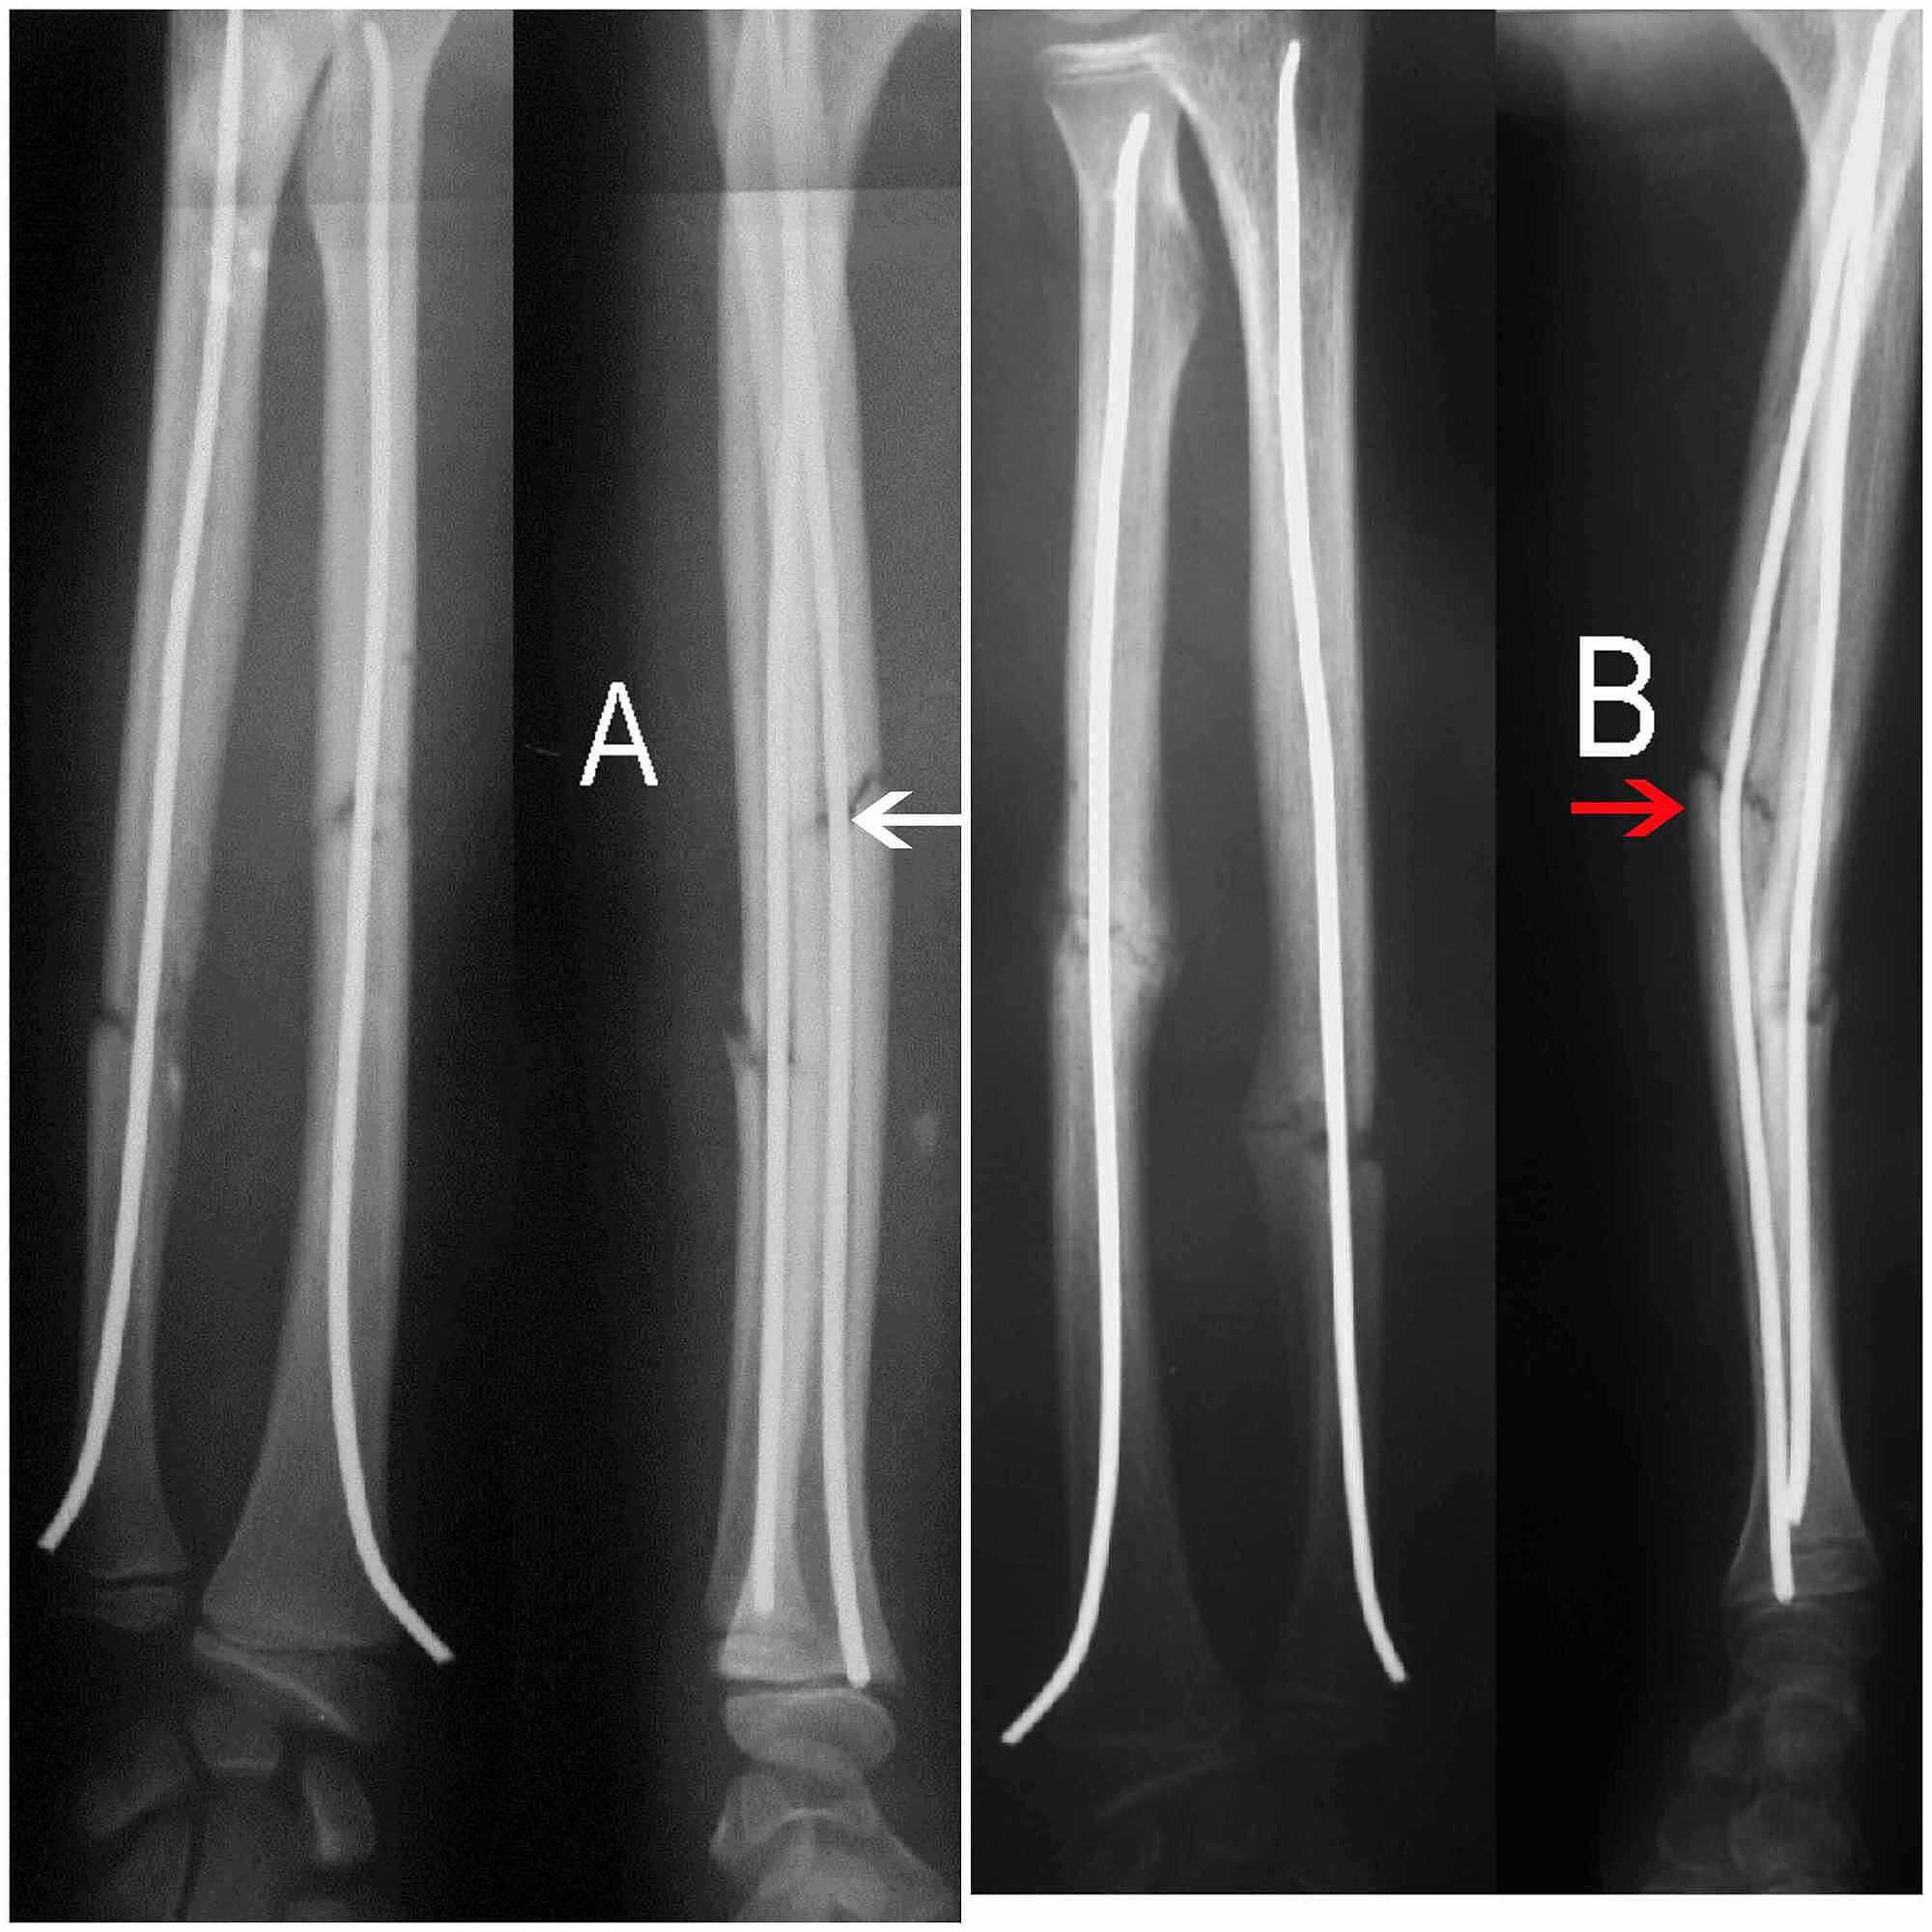 Cureus | Retrograde Fixation of the Ulna in Pediatric Forearm Fractures ...